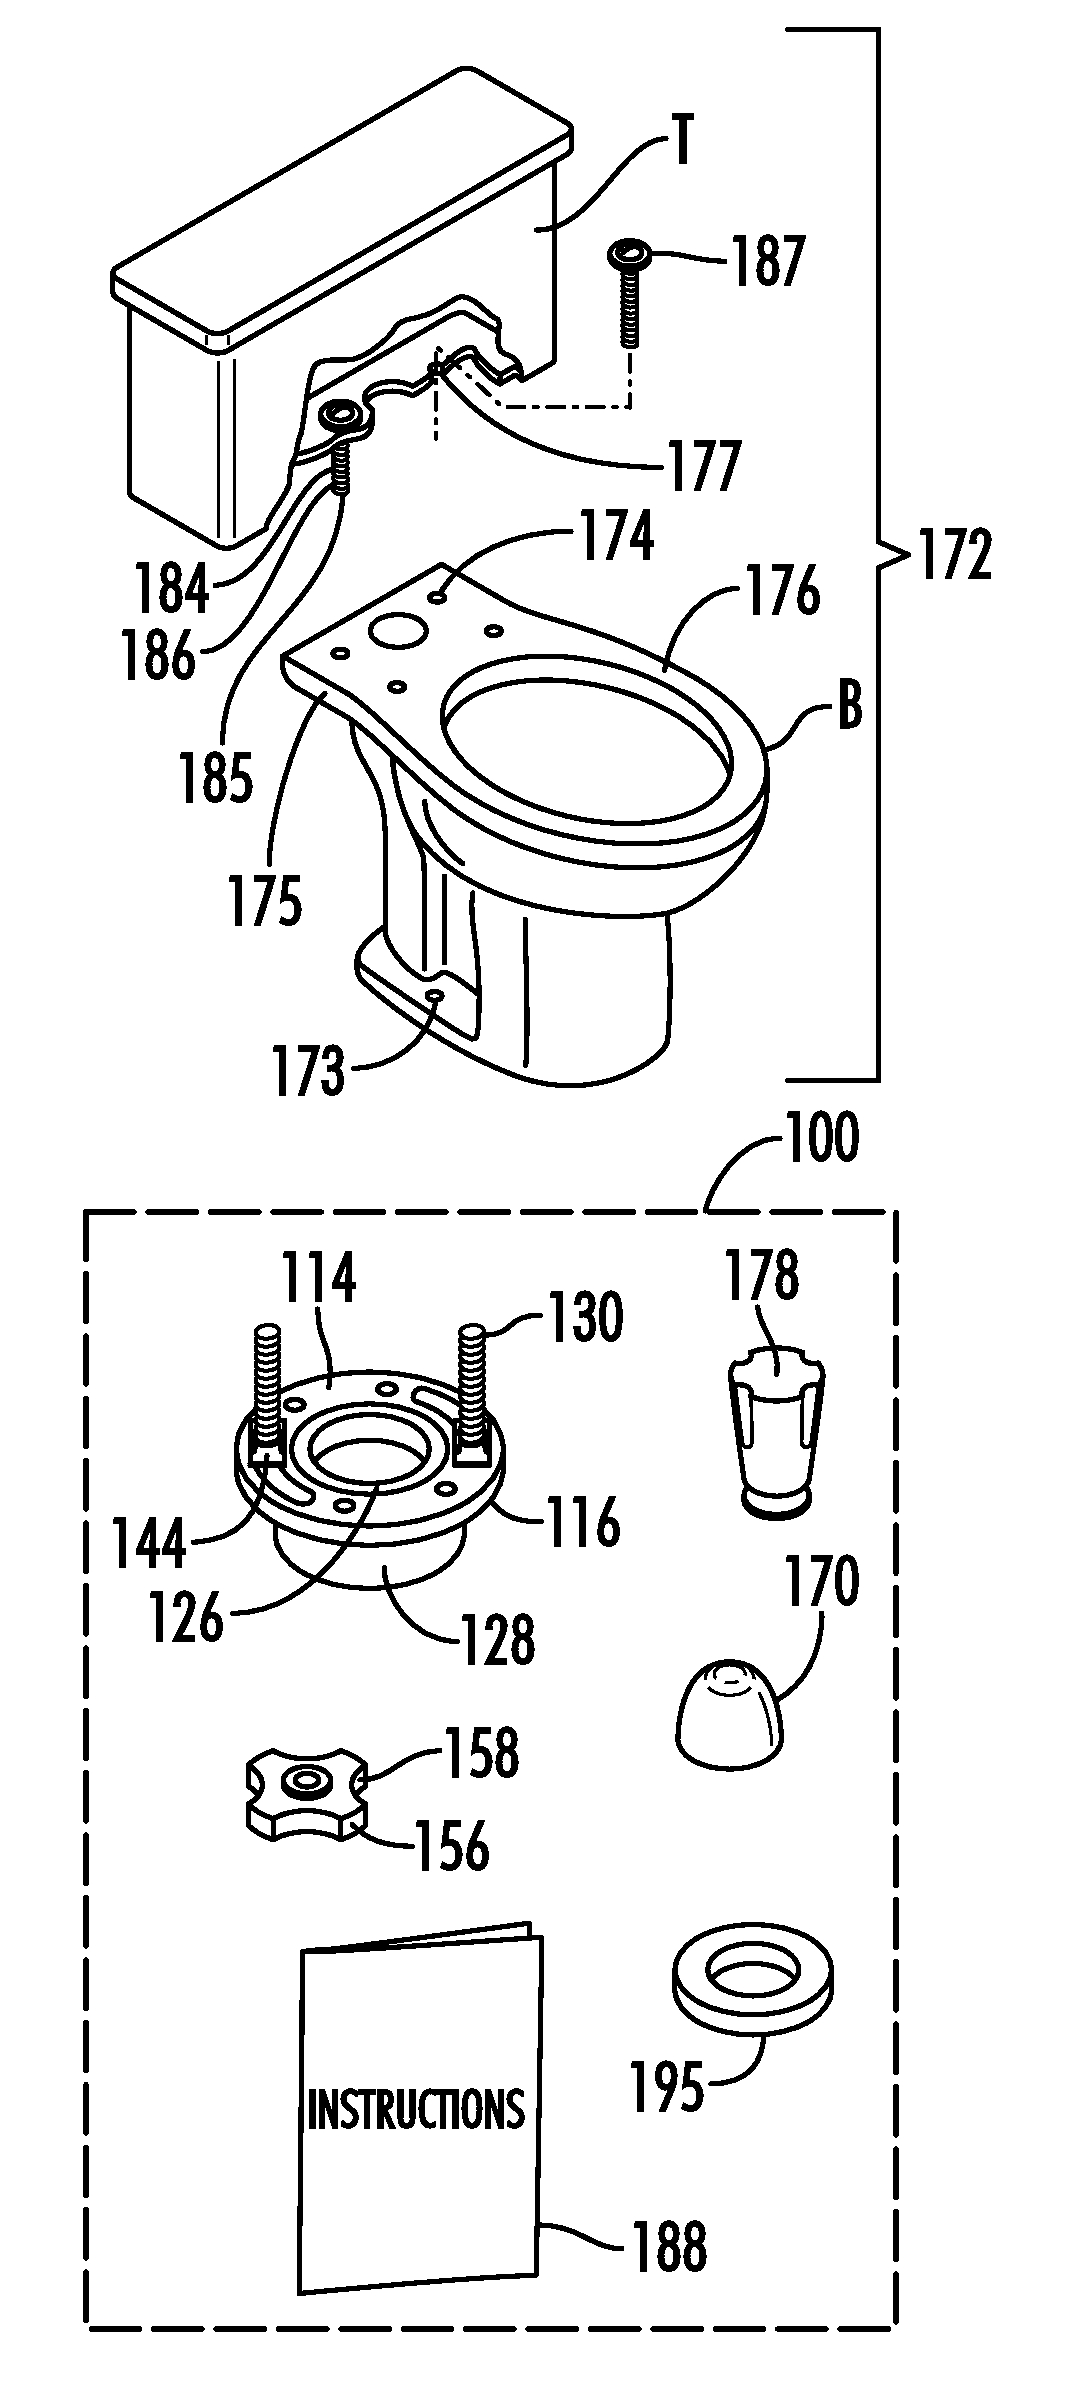 Kits, Assemblies and Methods for No-Tools Toilet Installation